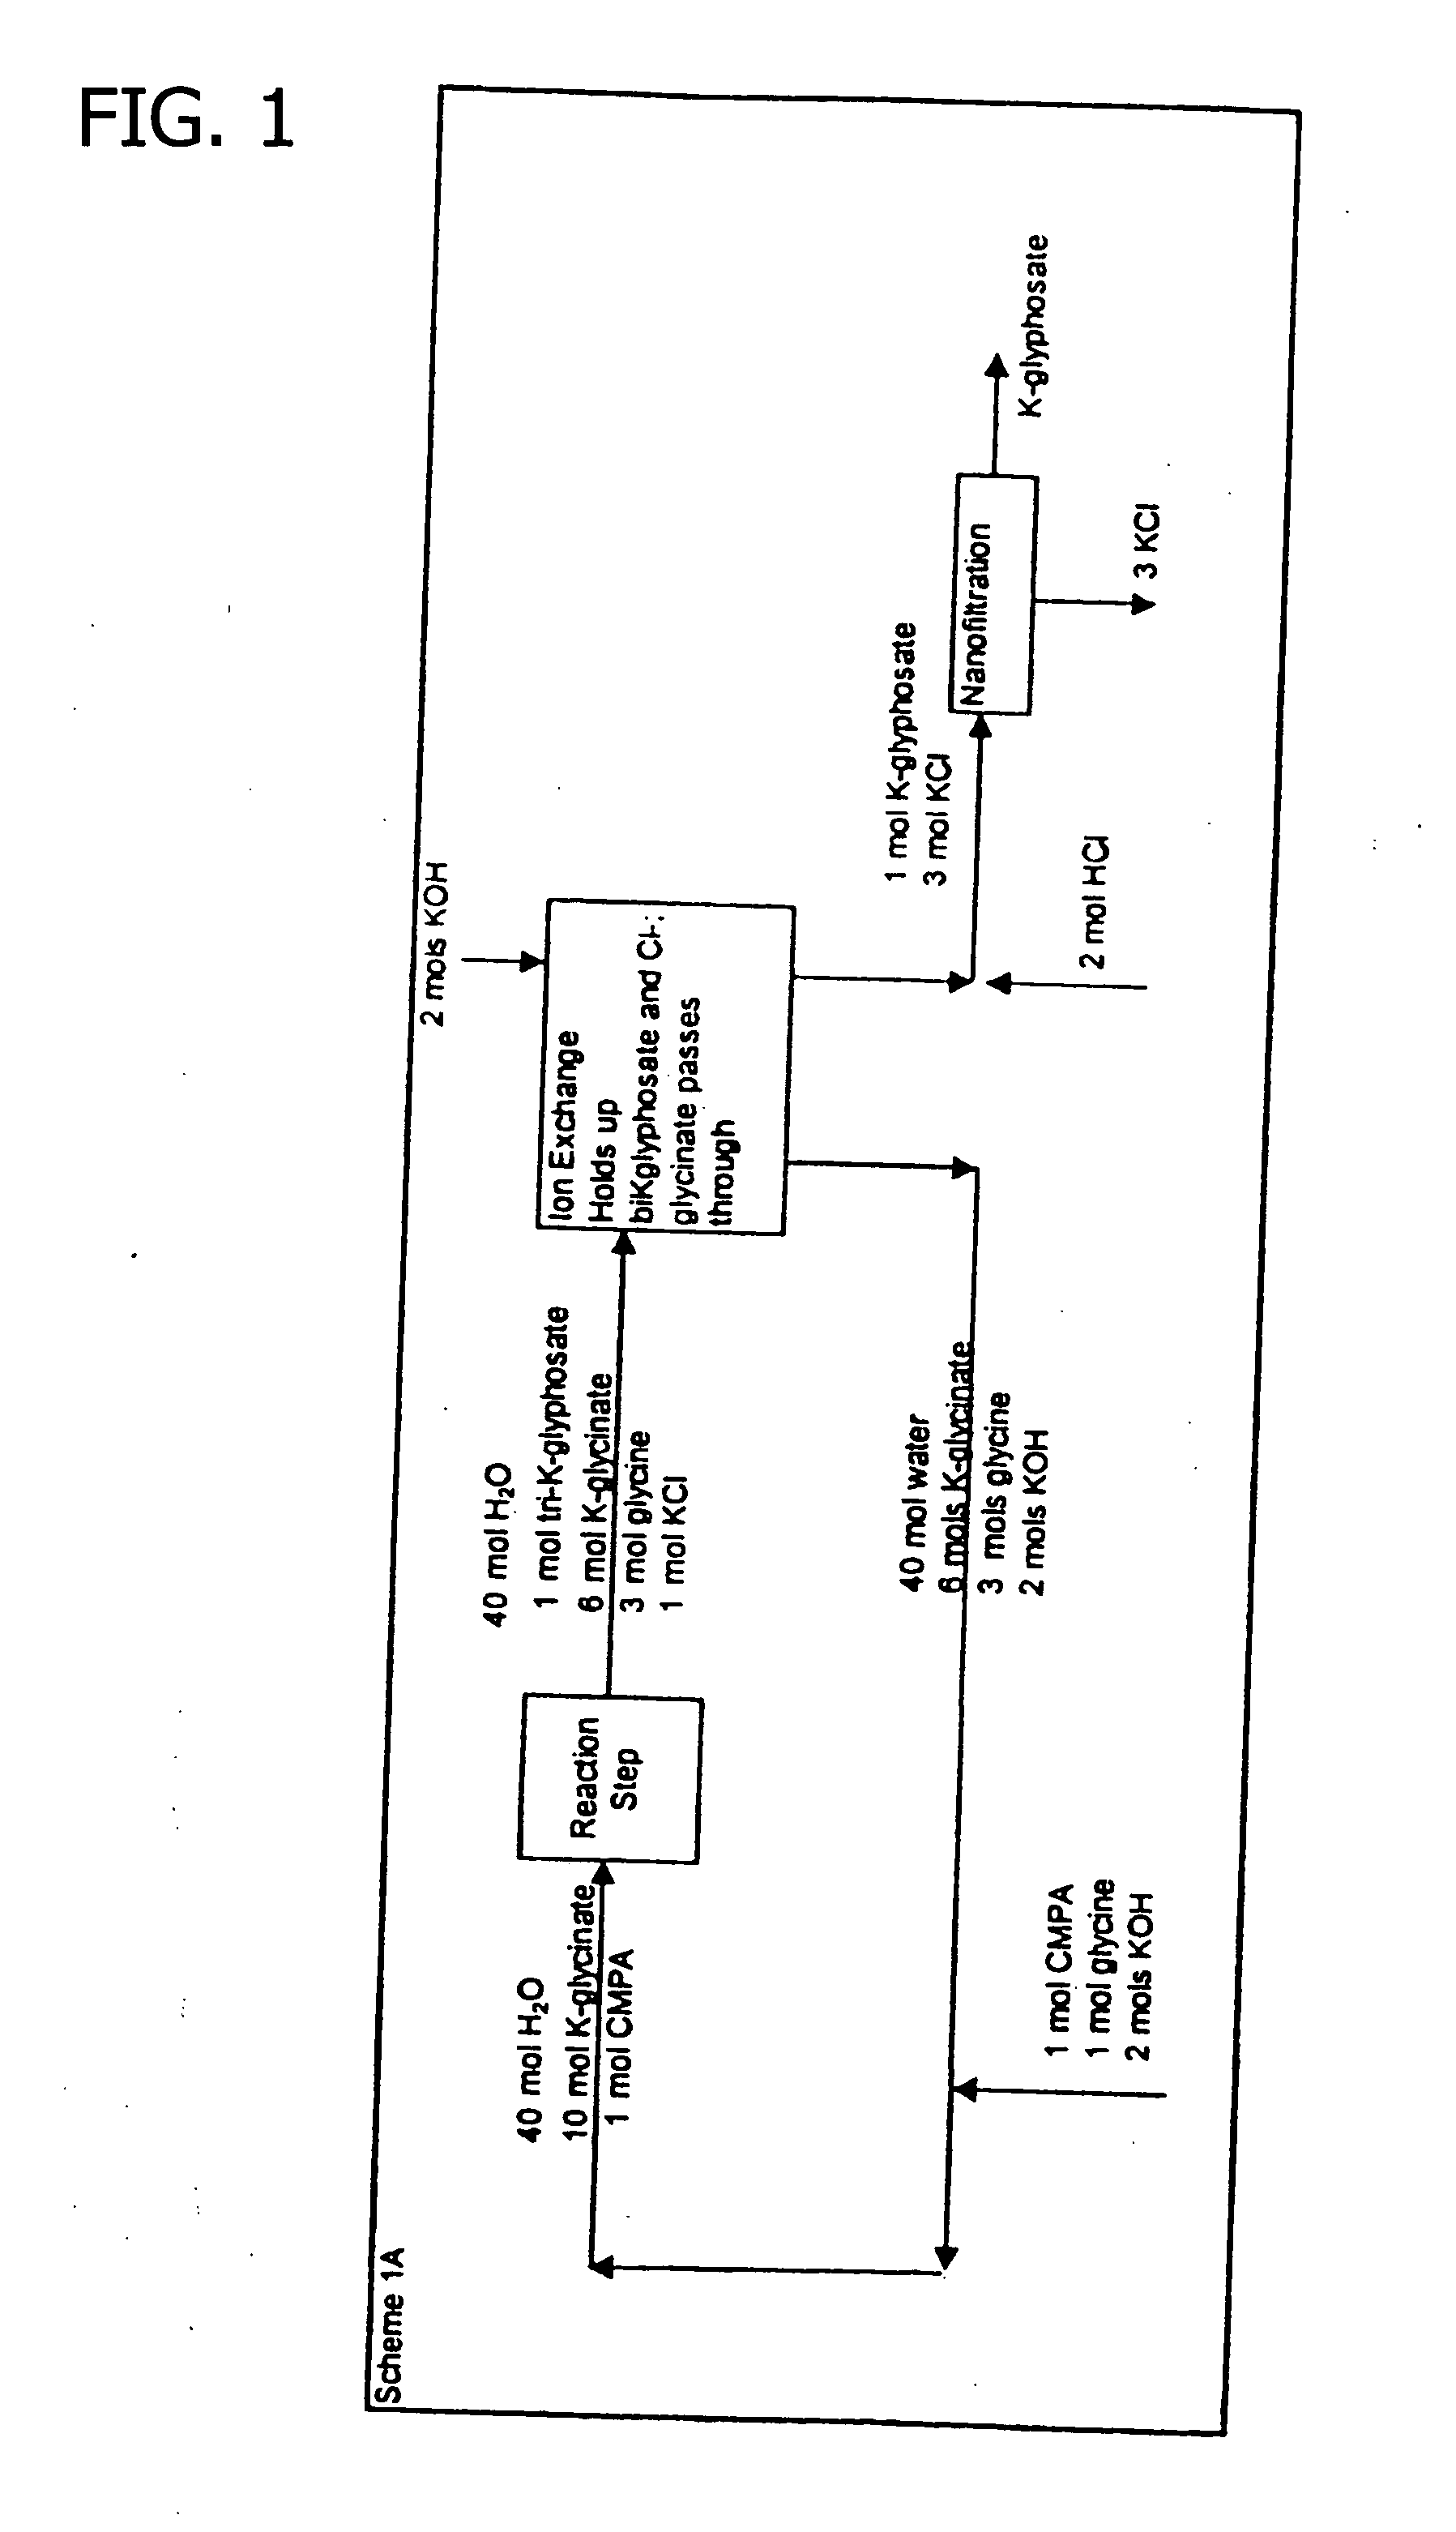 Process for the preparation of N-phosphonomethylglycine and derivatives thereof